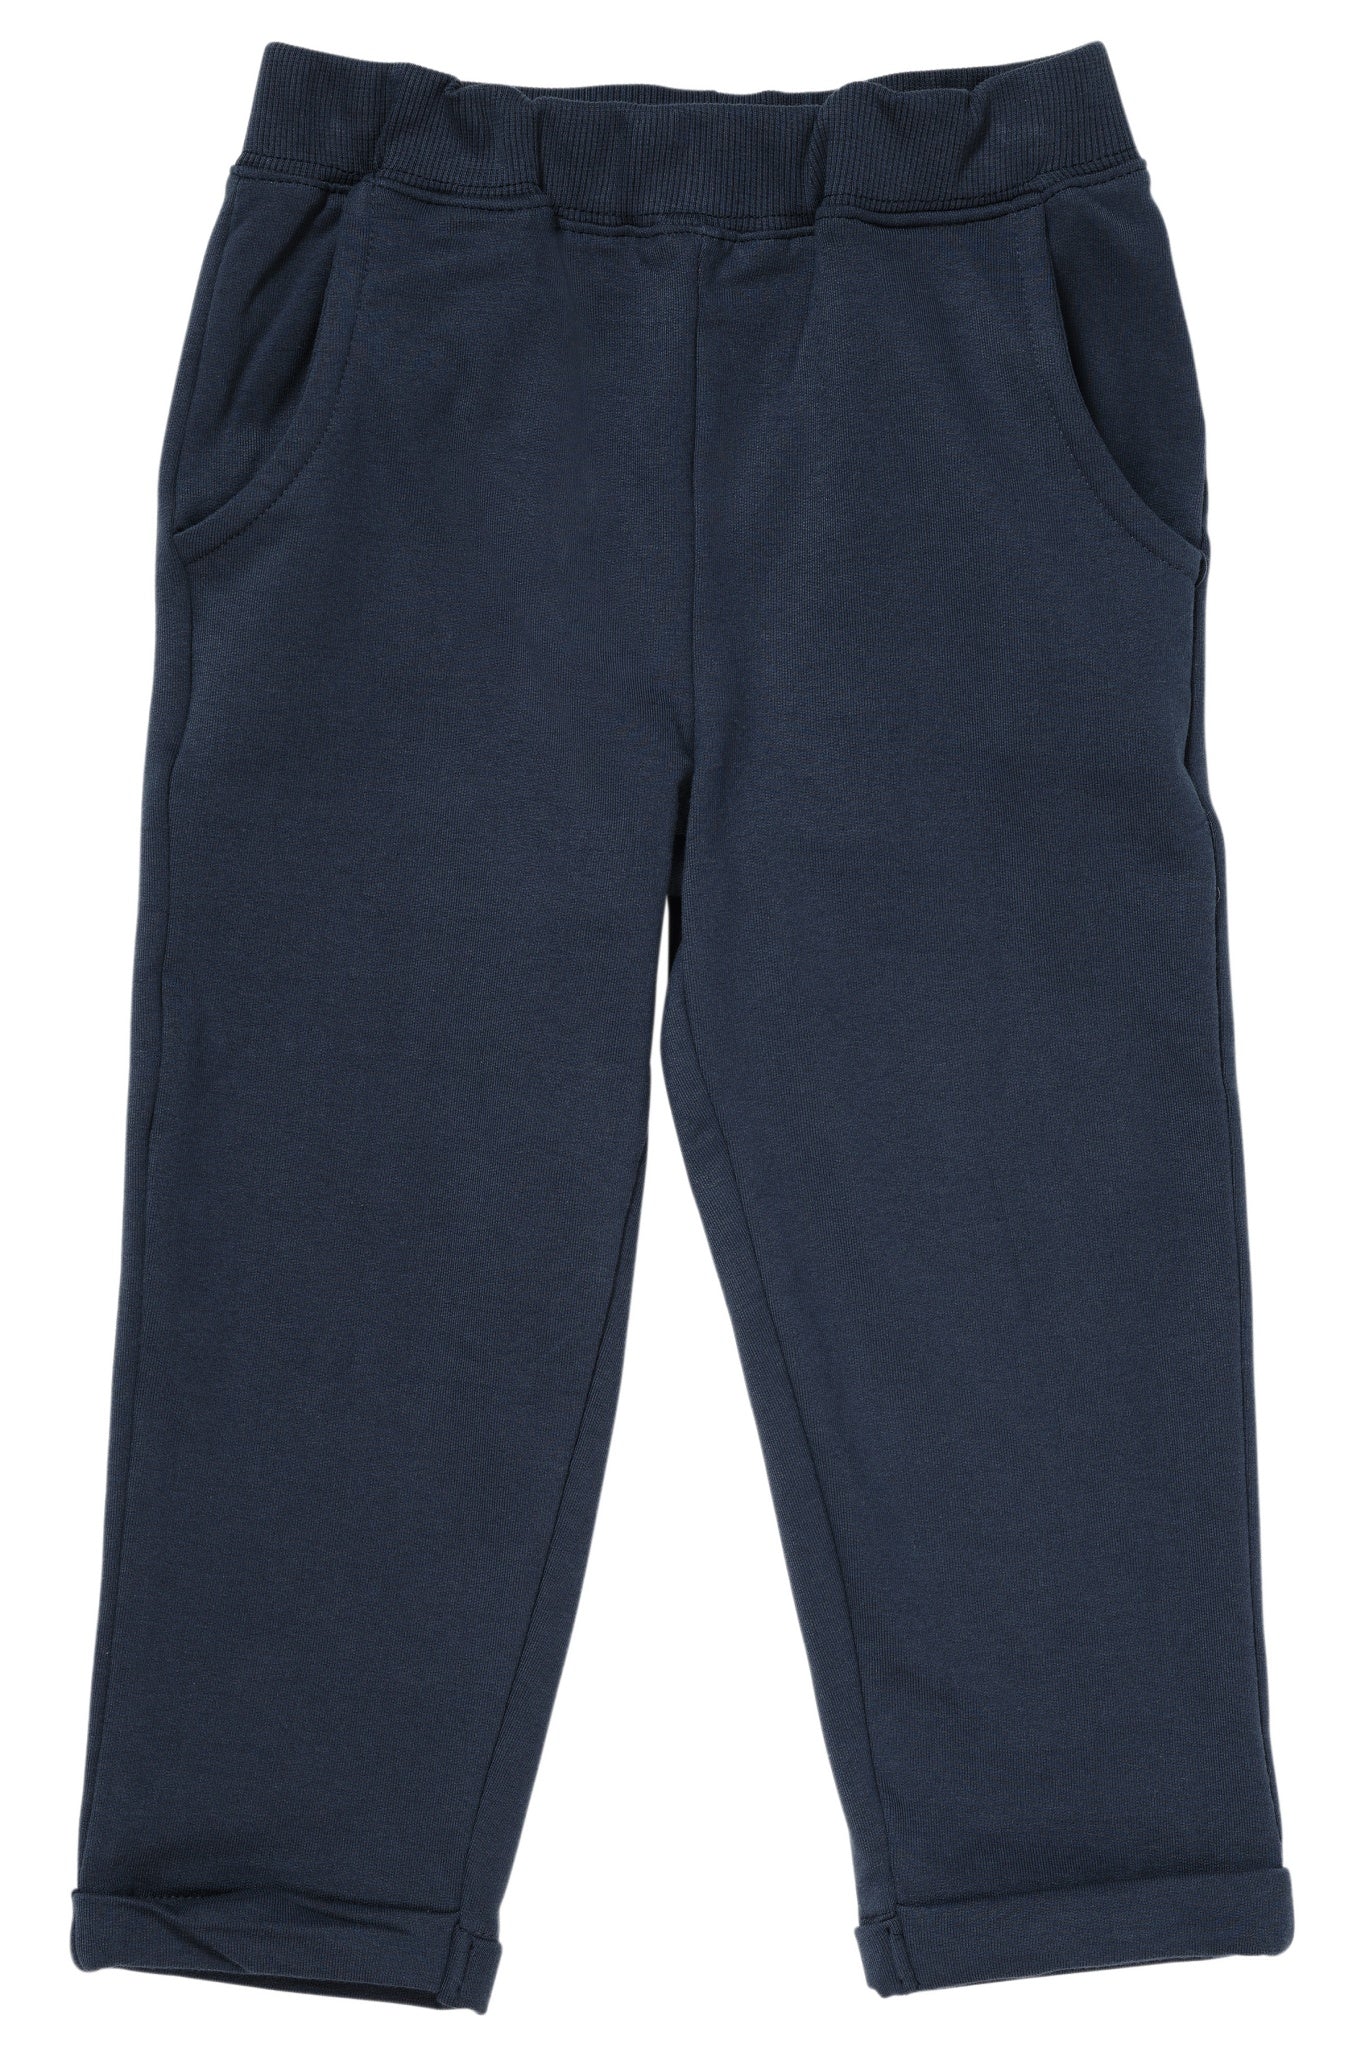 SWEAT SUITED PANTS BRUSHED - NAVY